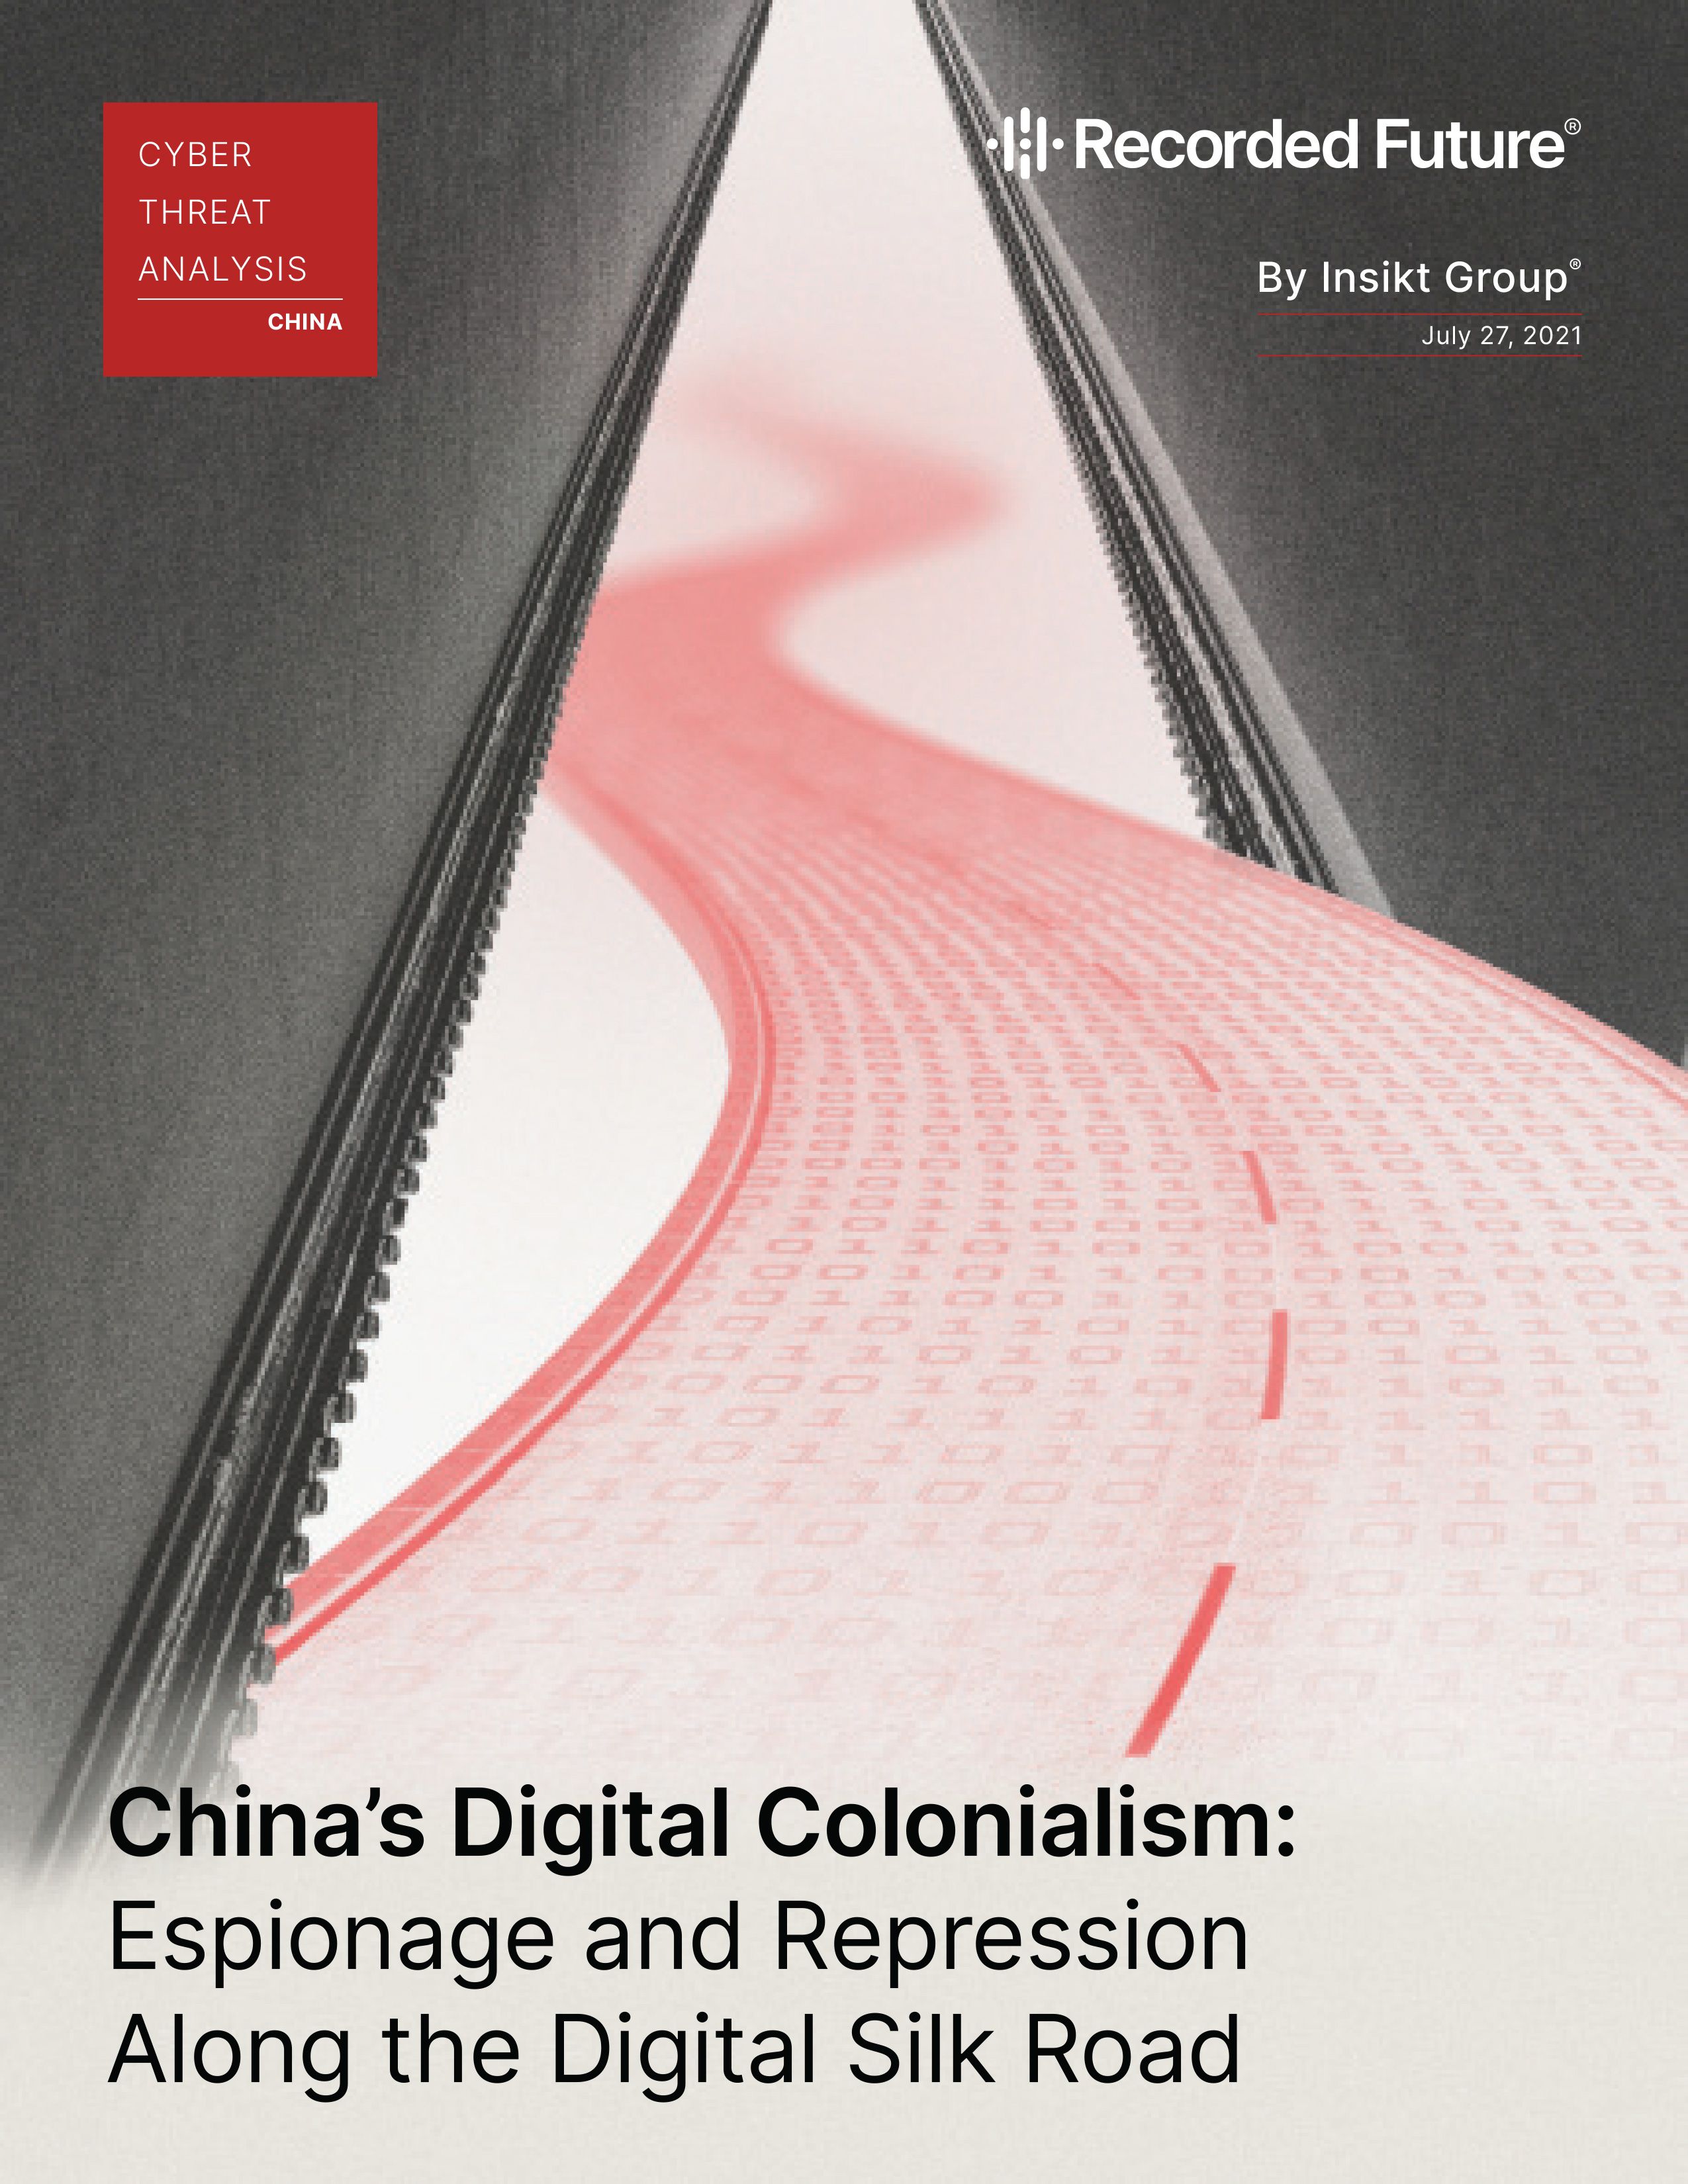 China's Digital Colonialism: Espionage and Repression Along the Digital Silk Road Report